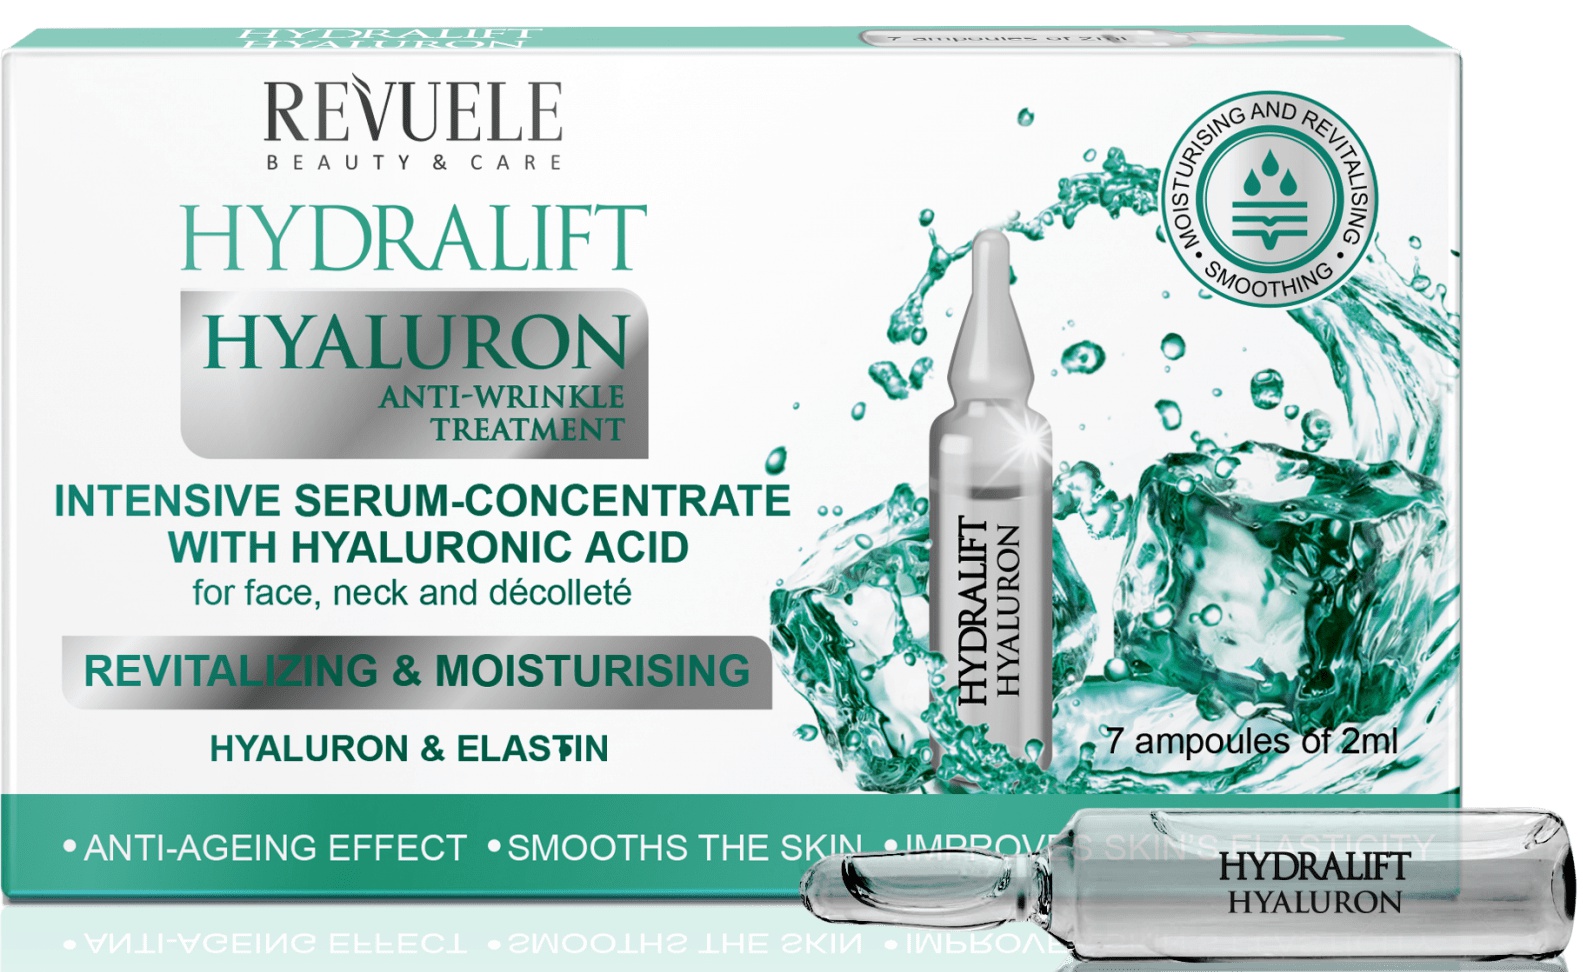 Revuele Hydralift Hyaluron Intensive Serum-Concentrate Ampoules